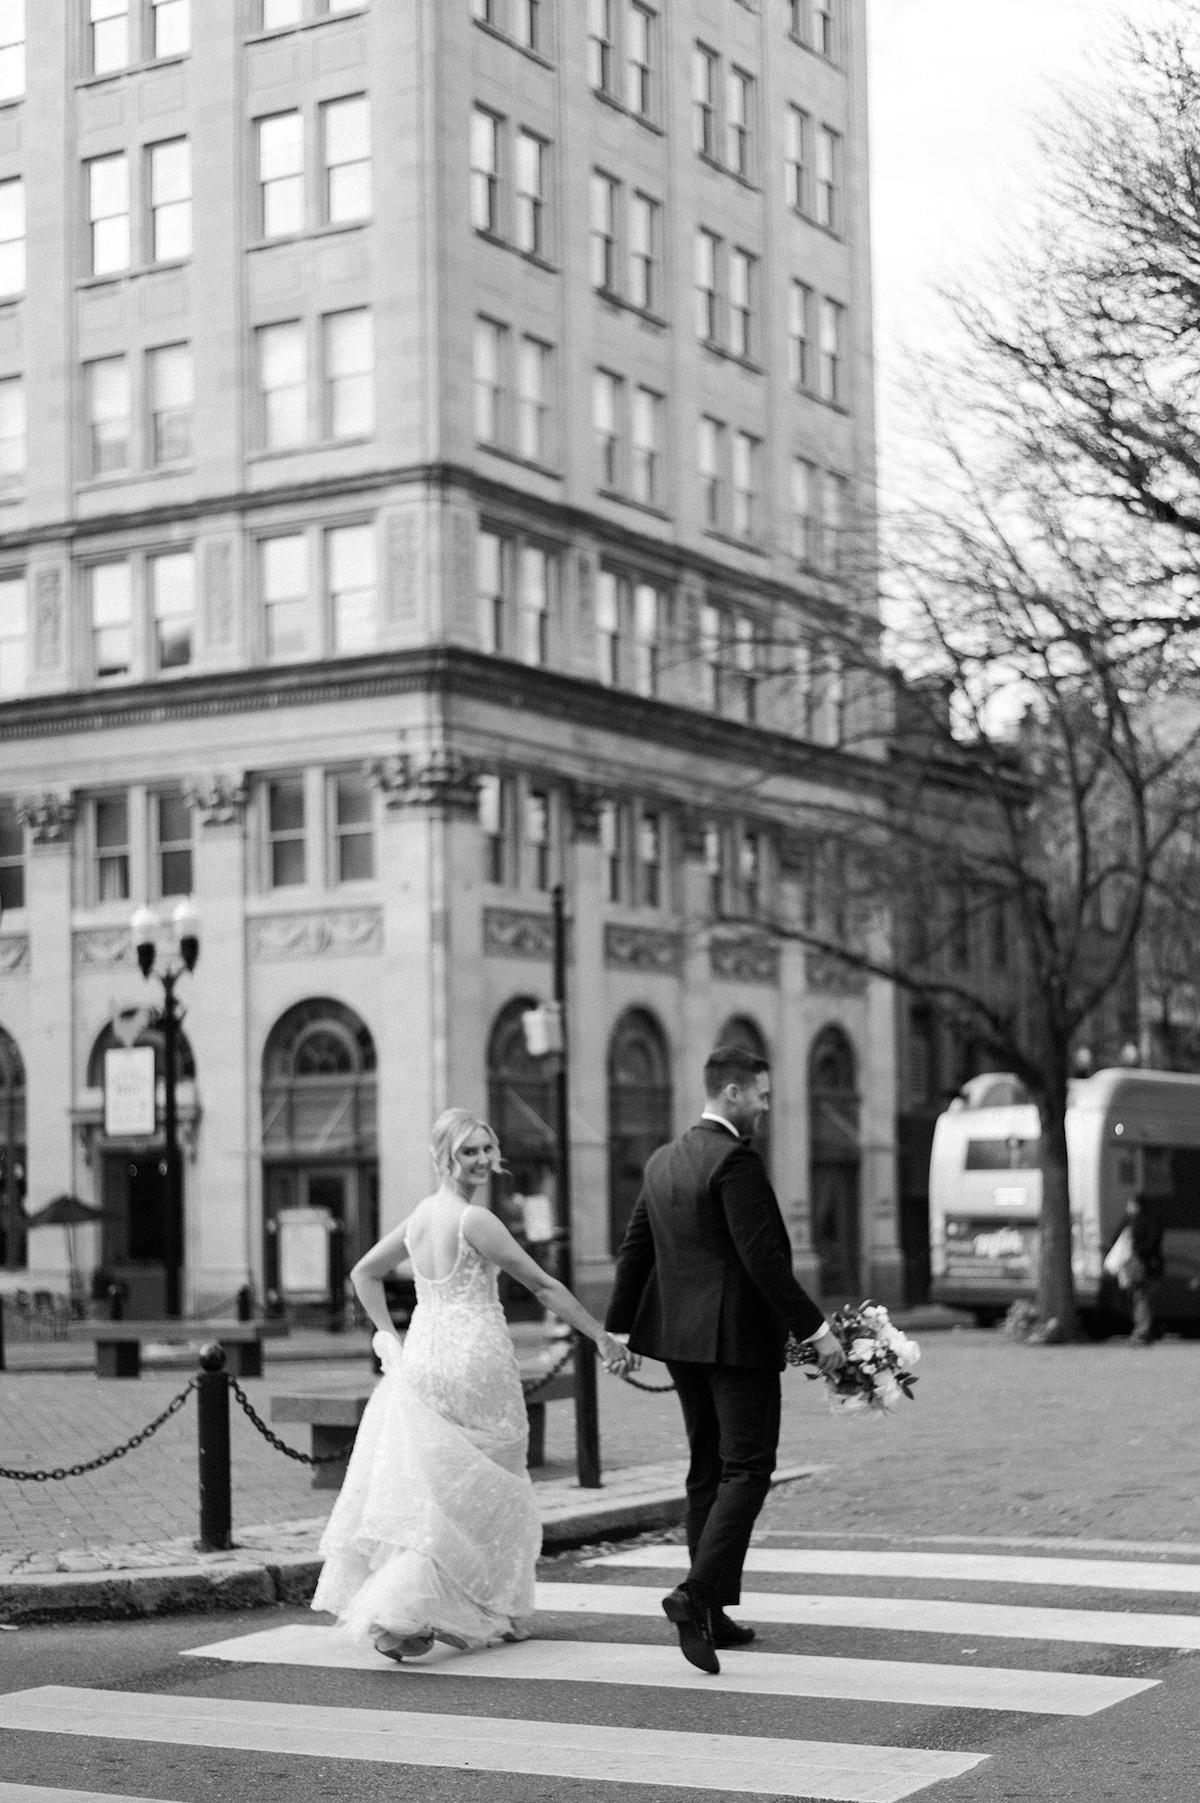 Continuation of the love journey in Lancaster City, where the bride and groom share a high-end moment of togetherness during a leisurely walk.